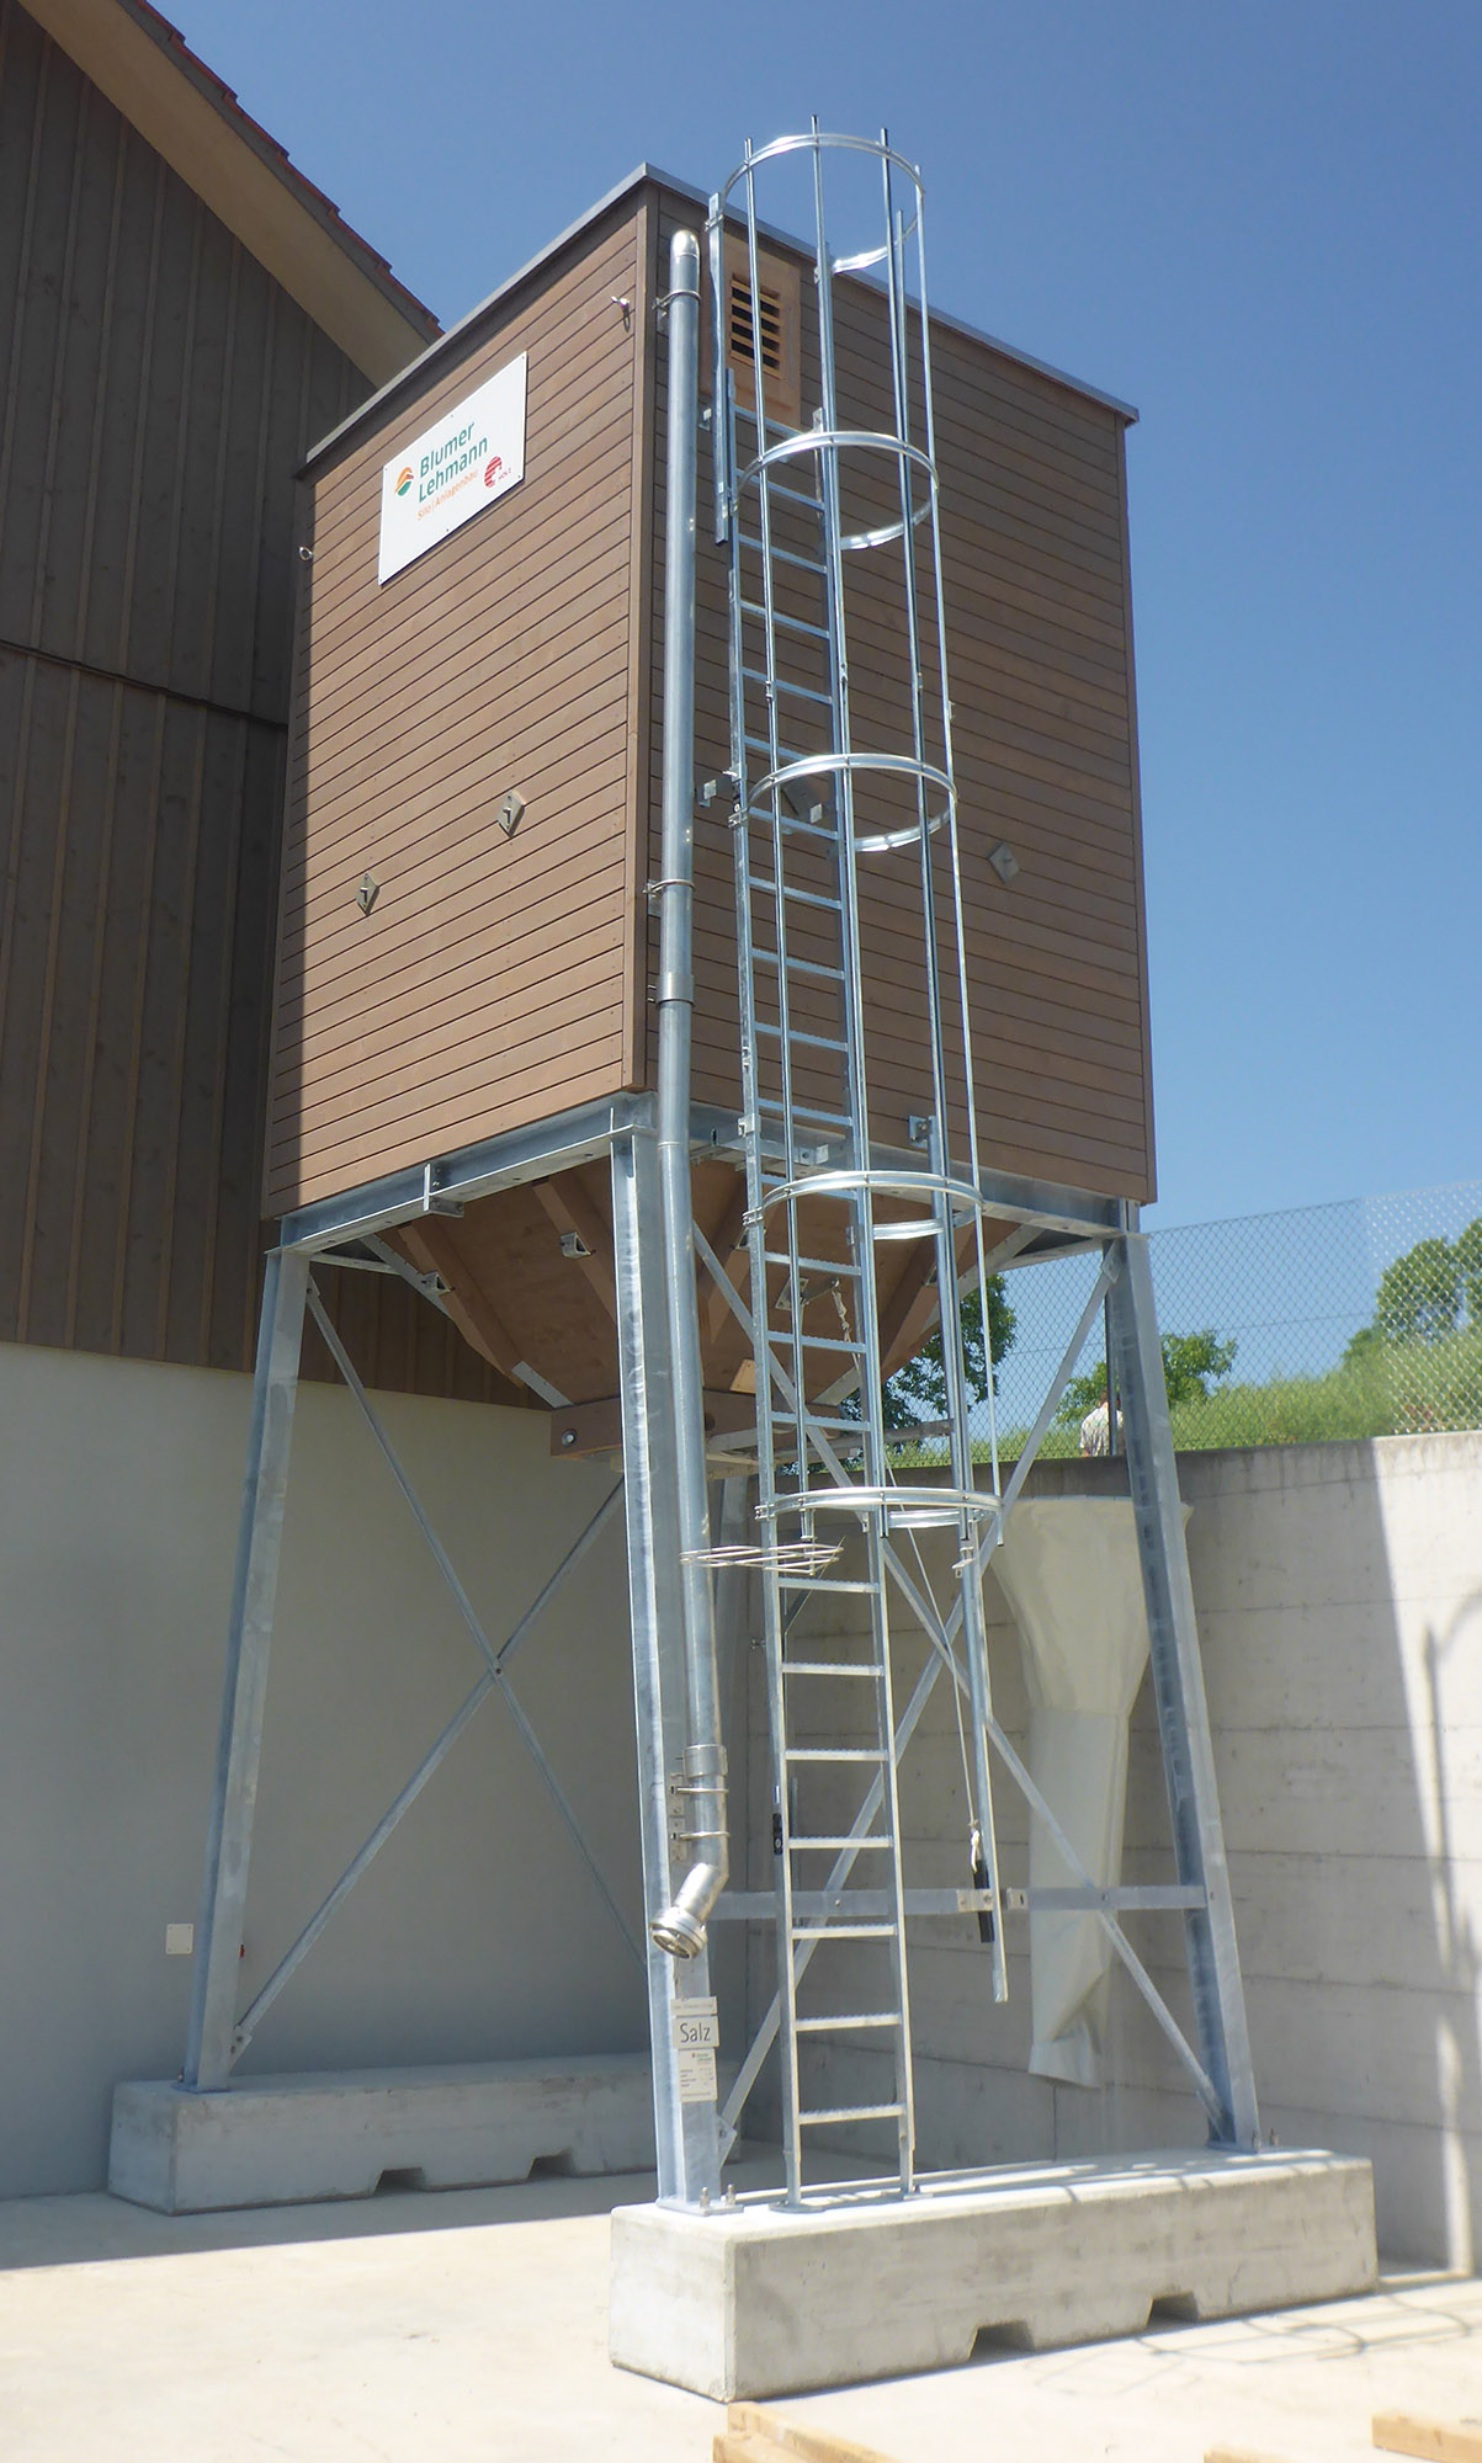 Small timber silo 25m3 in Bachs